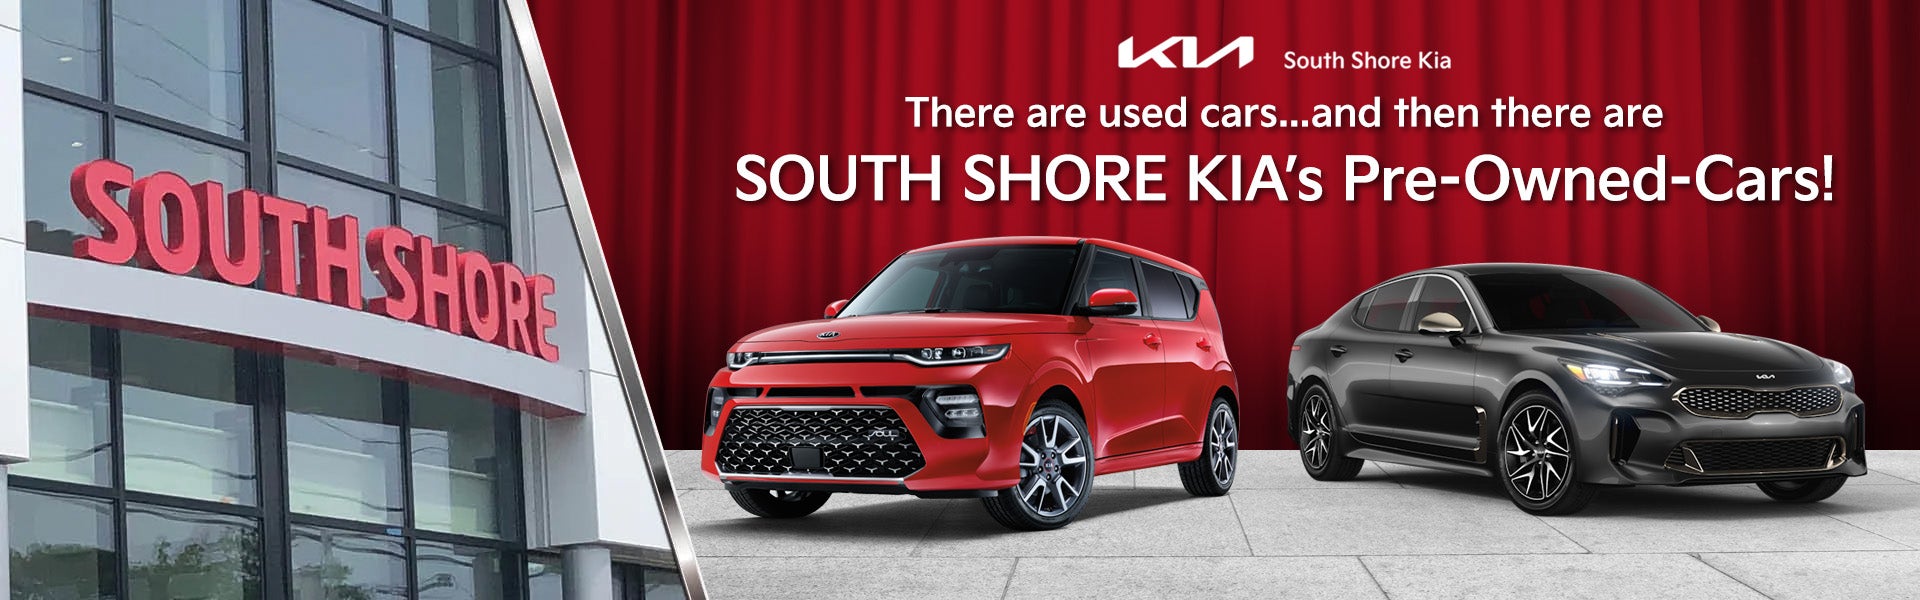 There are used cars..and then there are South Shore KIA's Pre-Owned Cars!